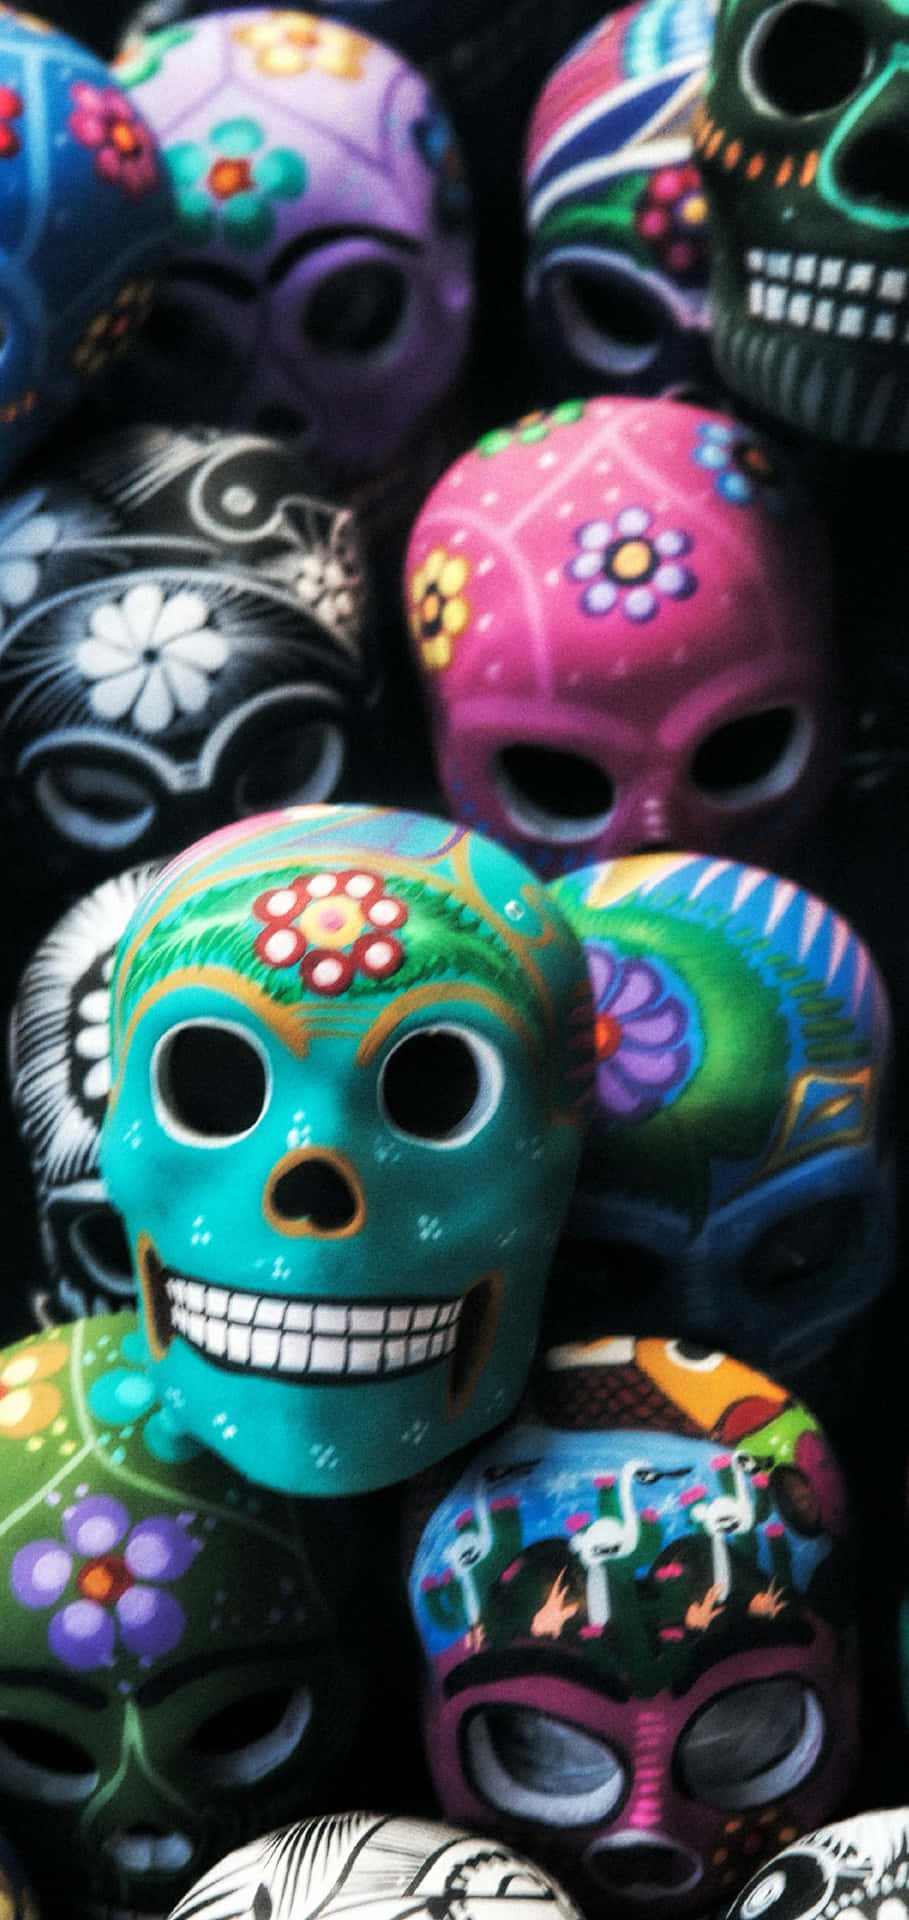 Celebrate and Protect with a Splendid Sugar Skull Phone Wallpaper